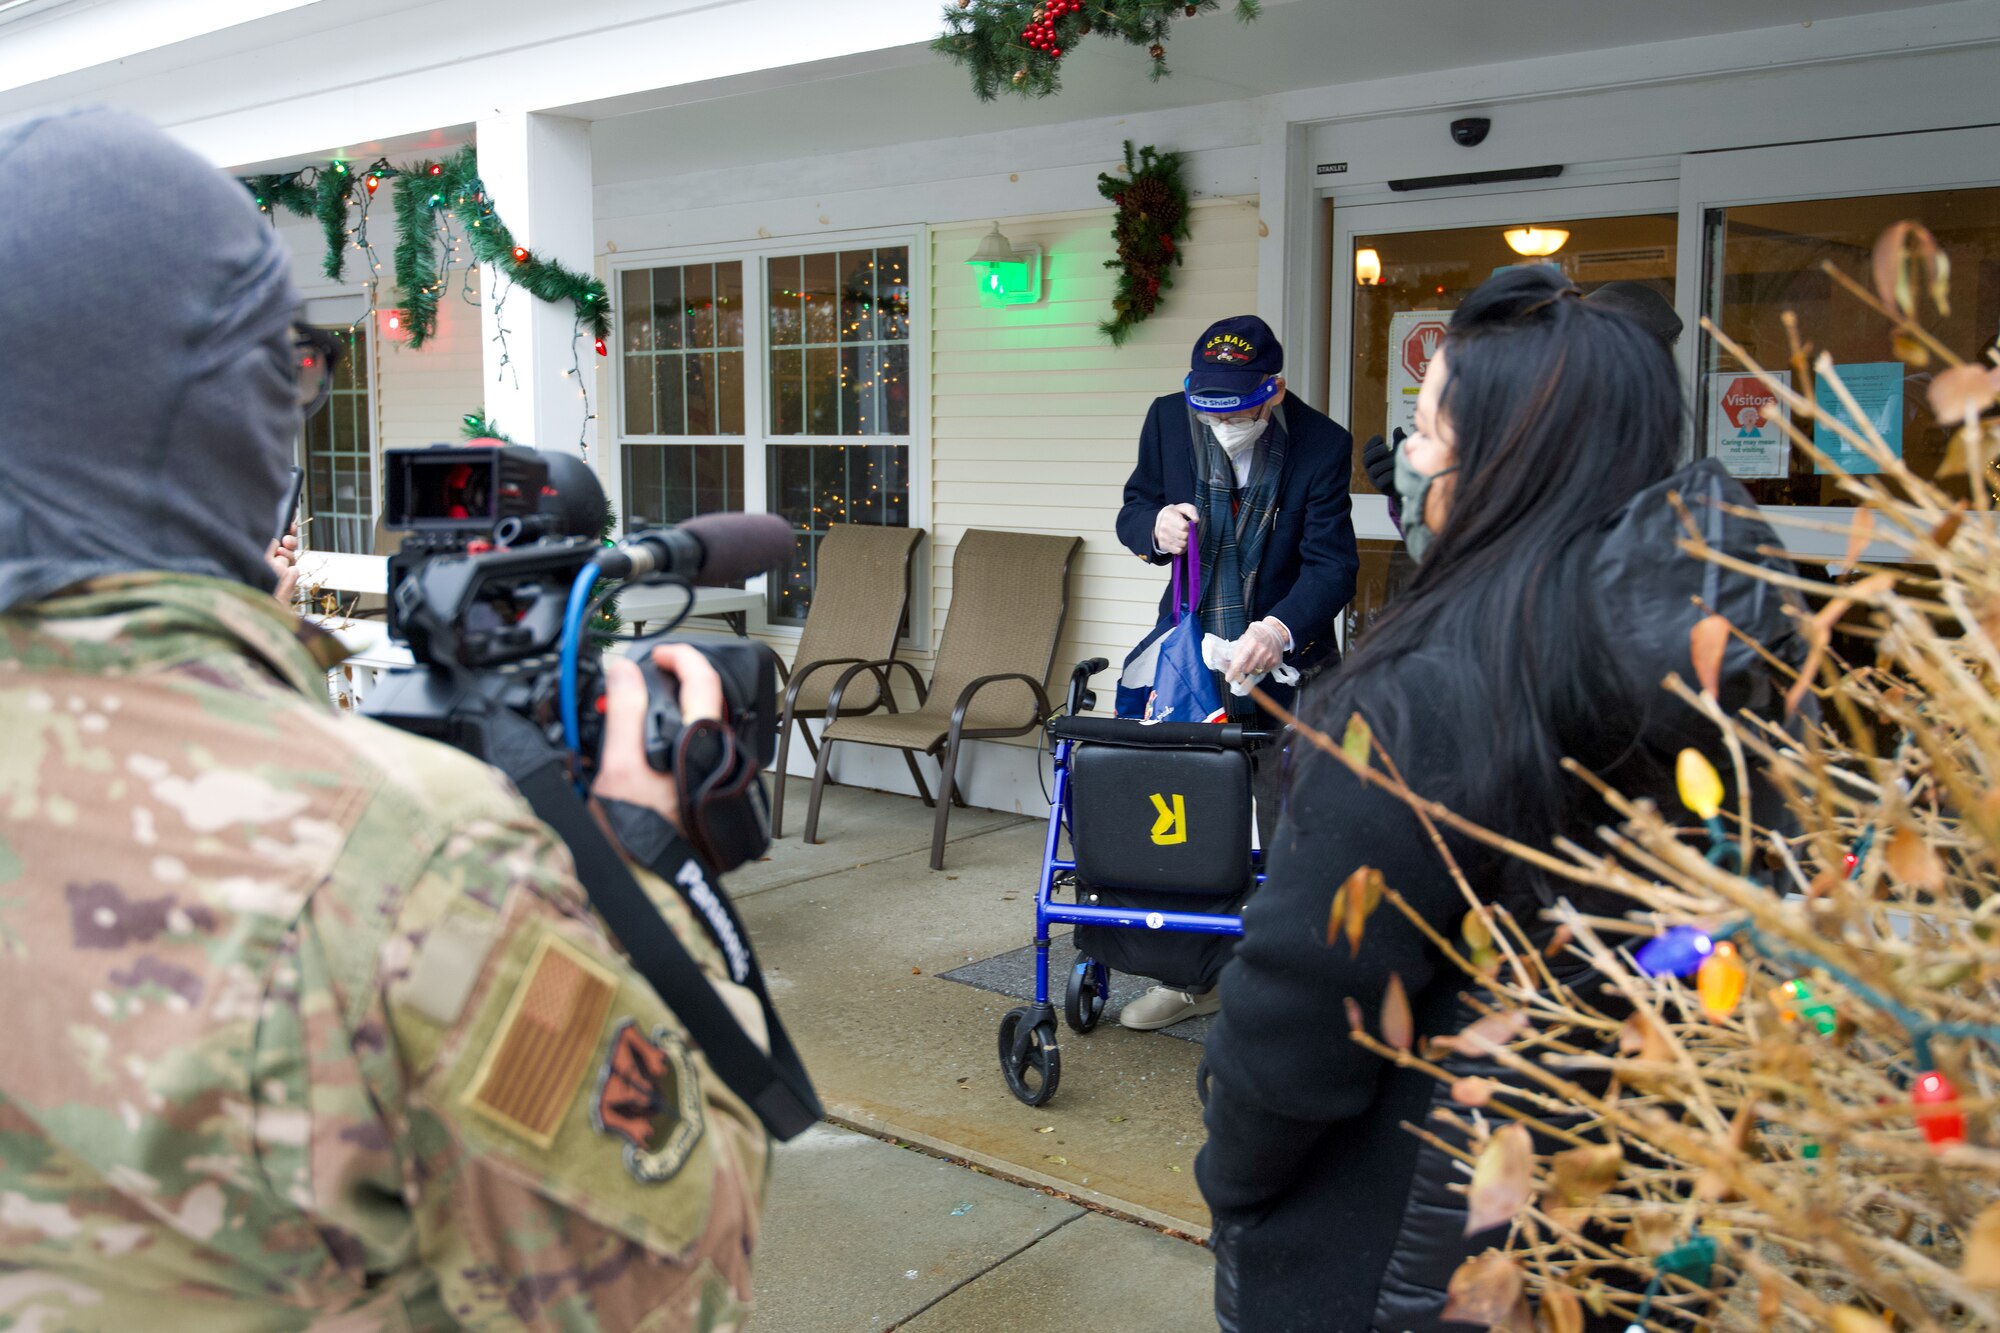 World War II veteran Lenny Roberge, Vermont’s oldest living veteran, prepares to hand out to Airmen present apple pie he baked in appreciation for receiving a flag flown in the F-35, at a small ceremony outside his nursing home in South Burlington, Vt., Dec. 22, 2020. In order to honor Roberge, Airmen from the 158th Fighter Wing had a flag flown in an F-35 during a combat training sortie over the mountains of Vermont and New York. (U.S. Air National Guard photo by Senior Master Sgt. Michael Davis)